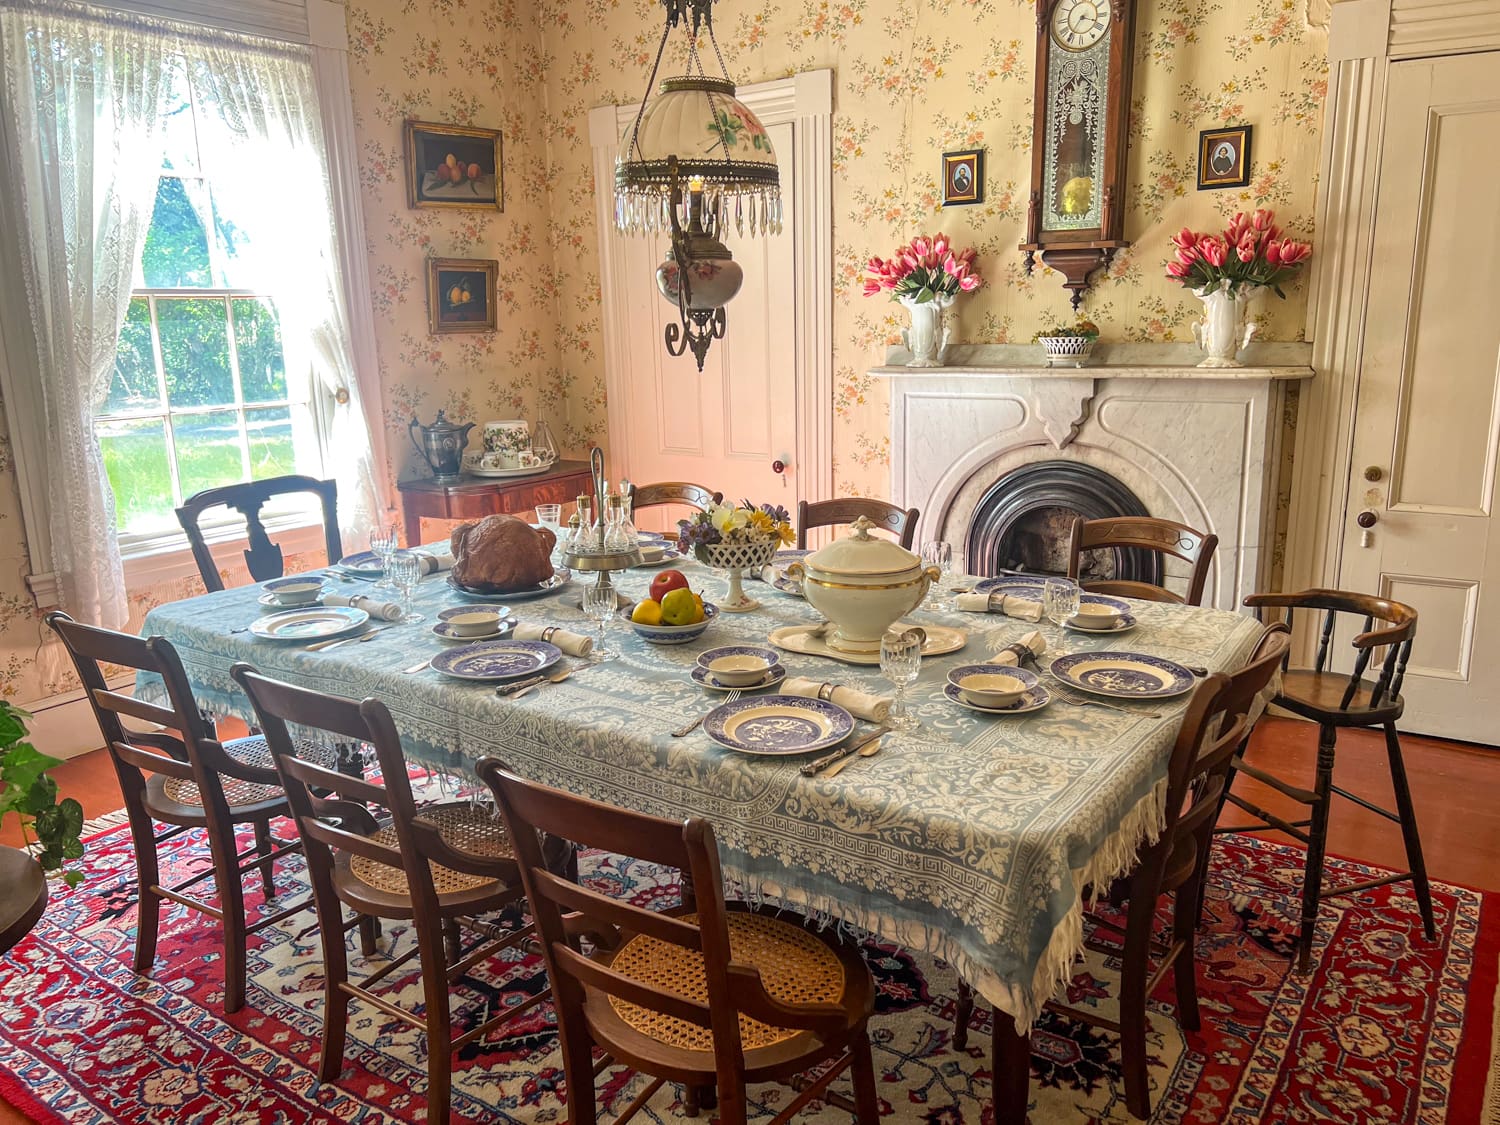 Dining room at General Vallejo's house